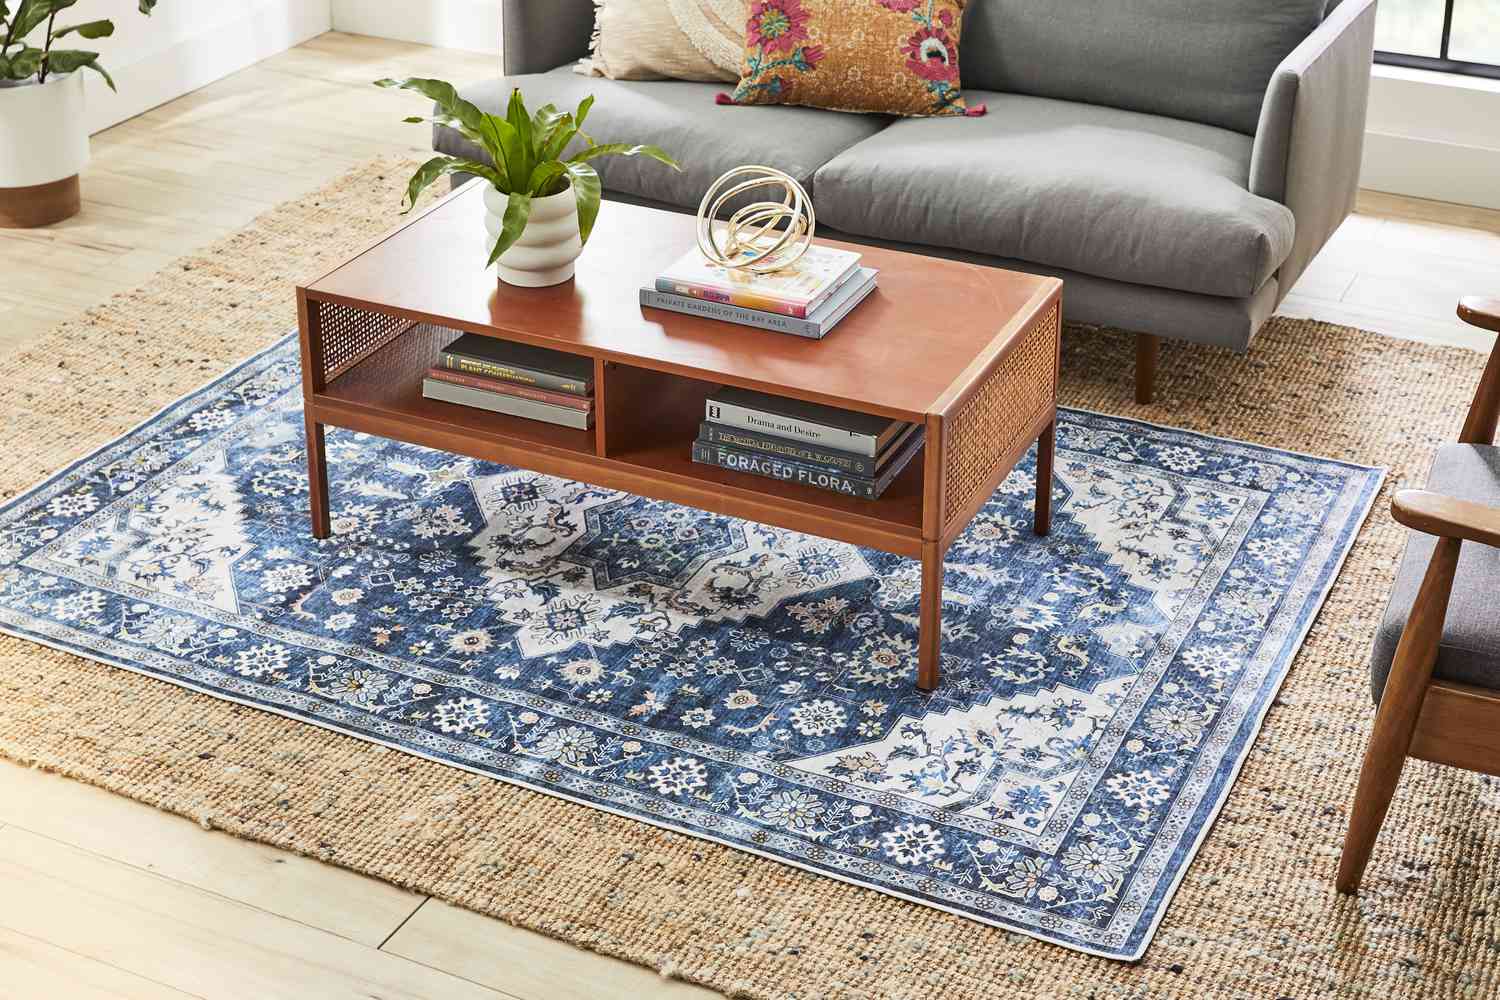 Area rug being used to highlight the coffee table area